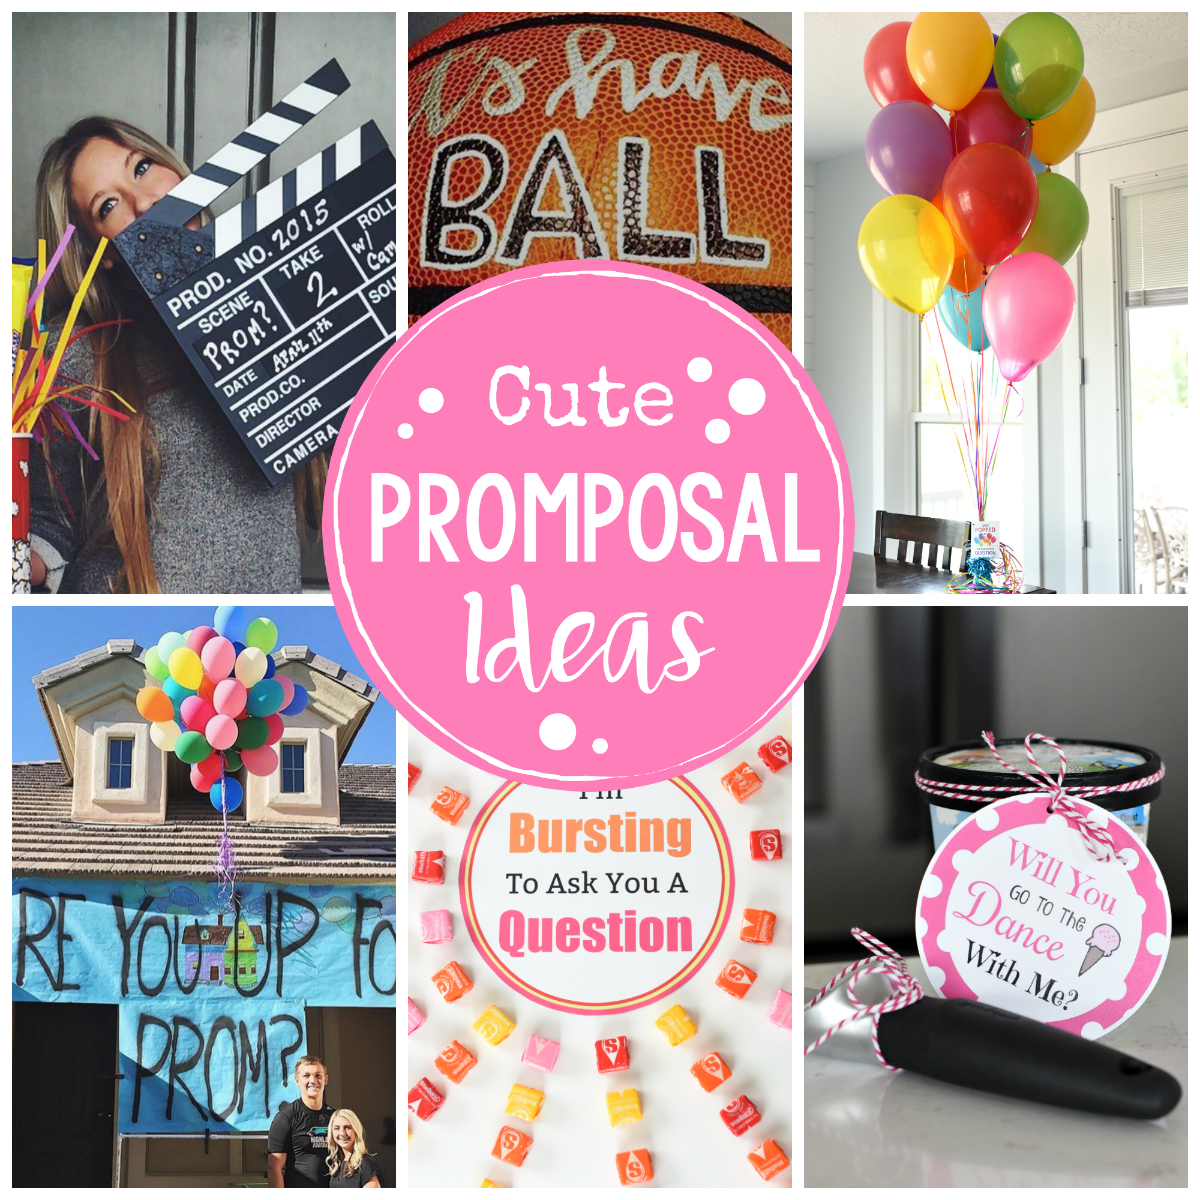 promposal ideas: cute ways to ask someone to homecoming or prom